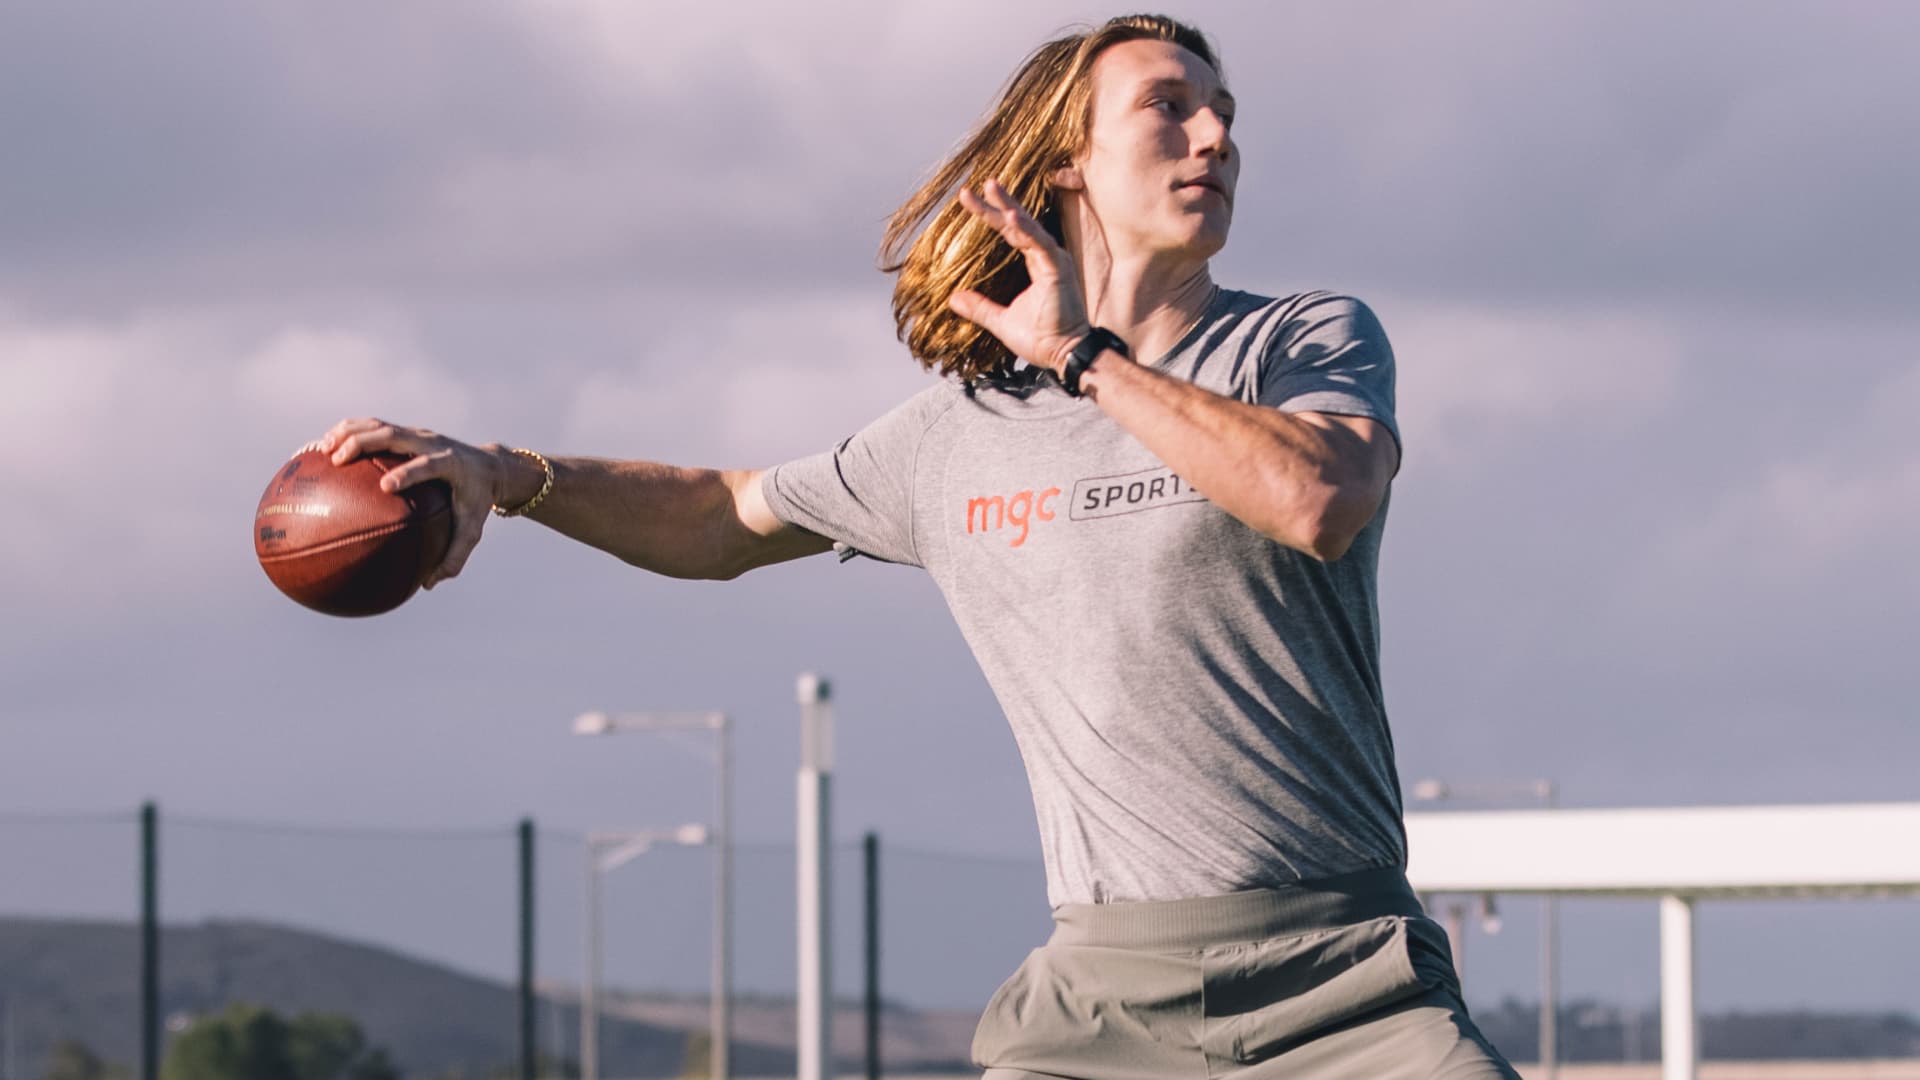 Quarterback Trevor Lawrence sets up for a throw during Jordan Palmer's QB Summit NFL Draft Prep in a park on January 25, 2021 in Orange County, CA.